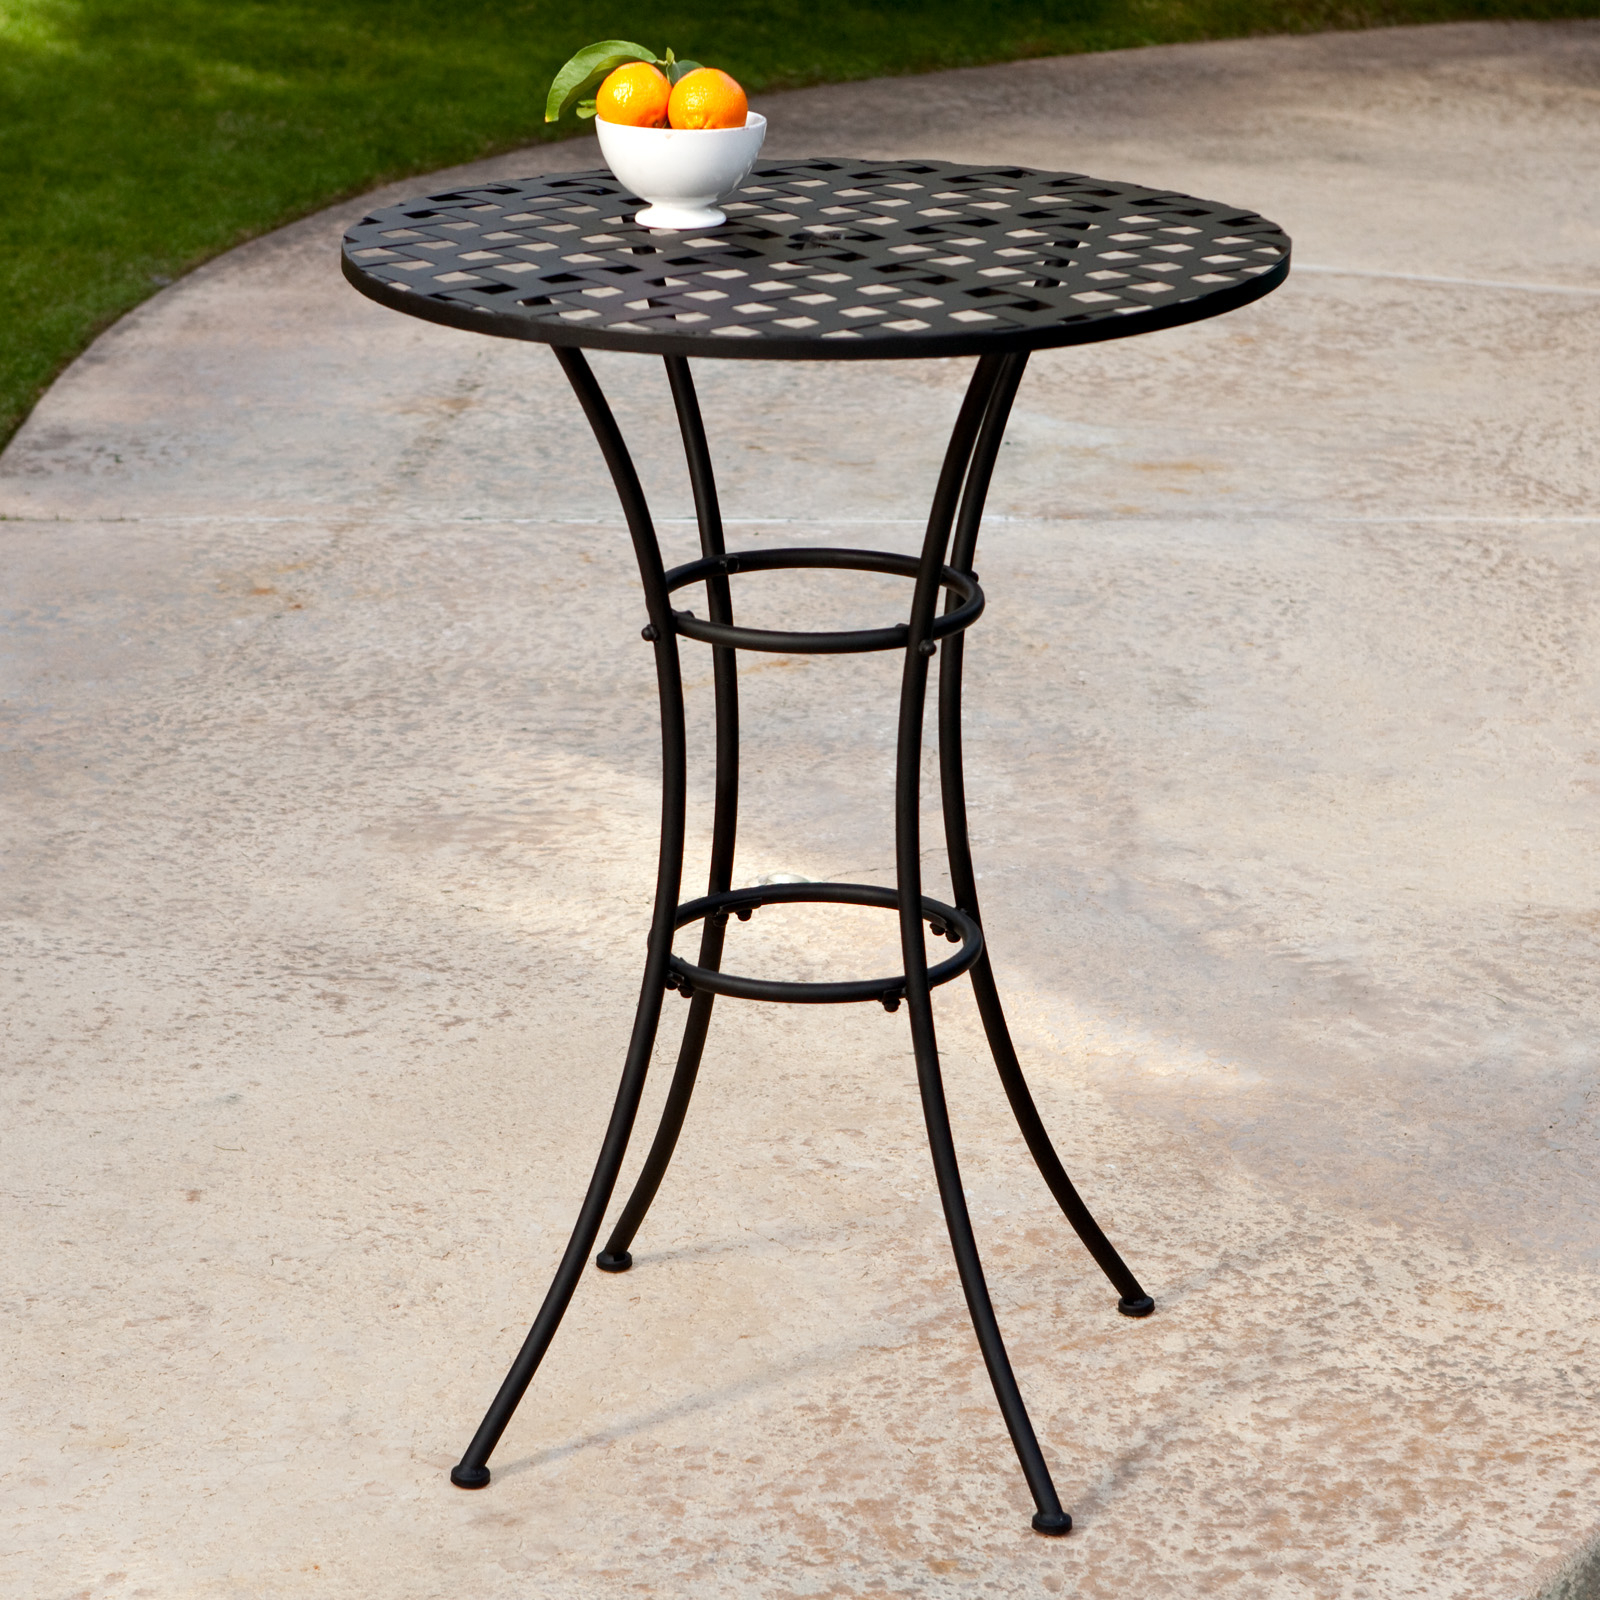 Wrought iron bar height table 2